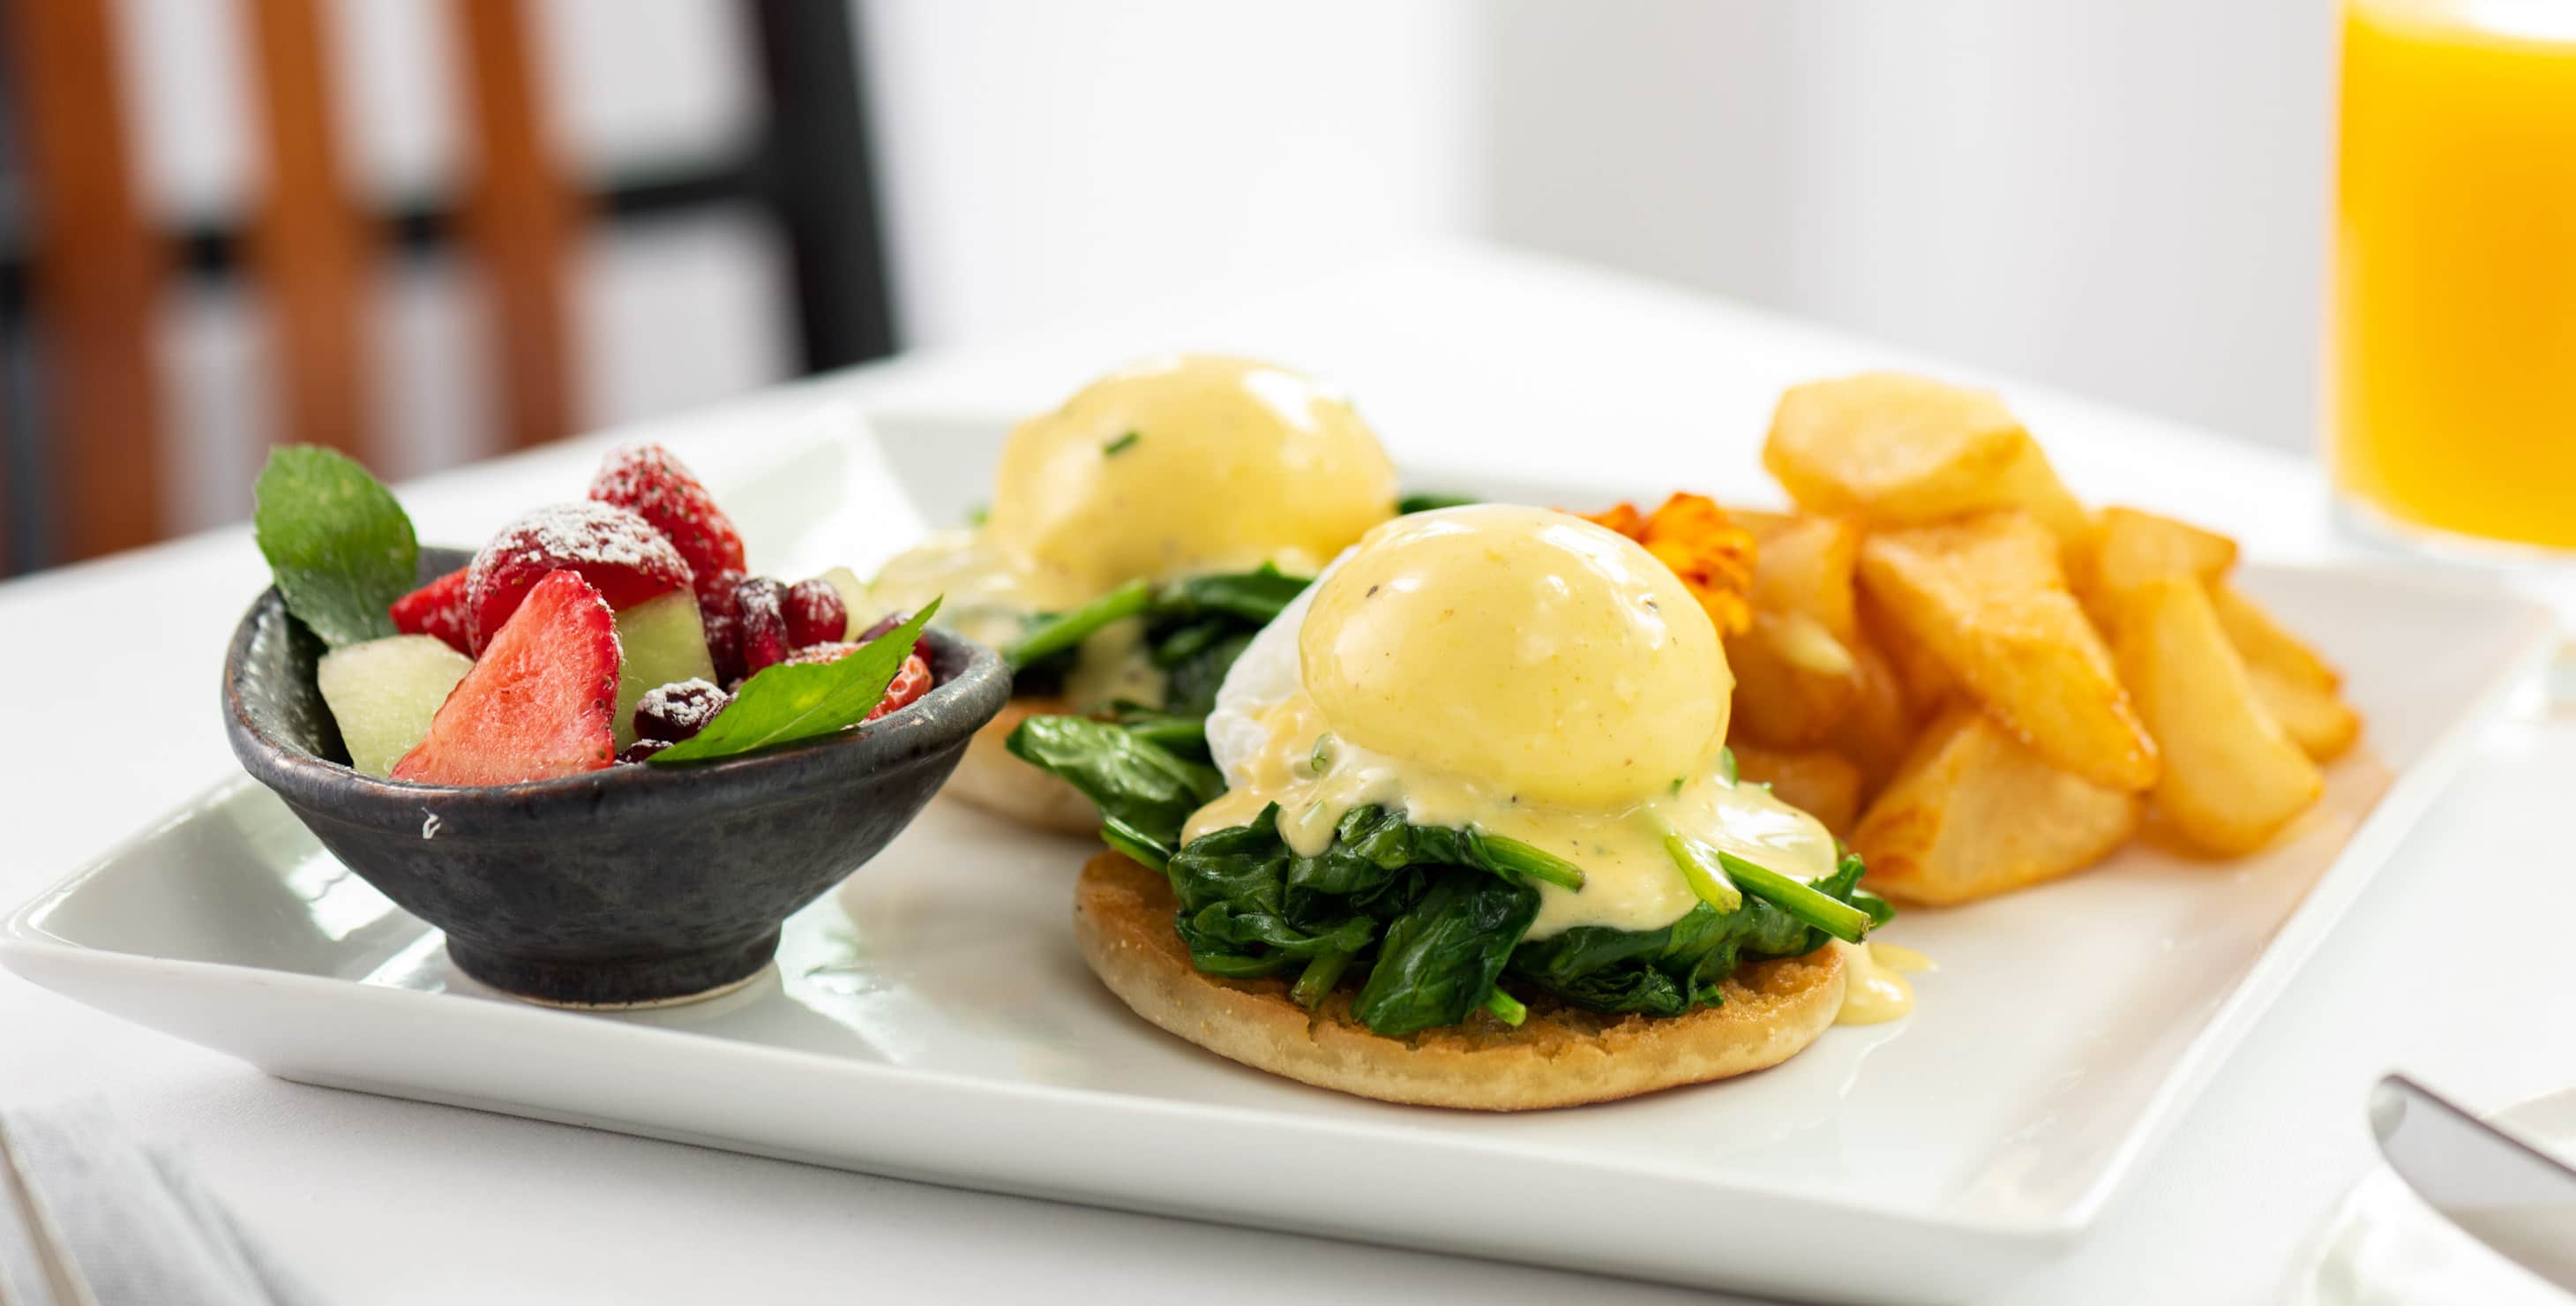 Eggs Benedict served with breakfast potatoes and sides